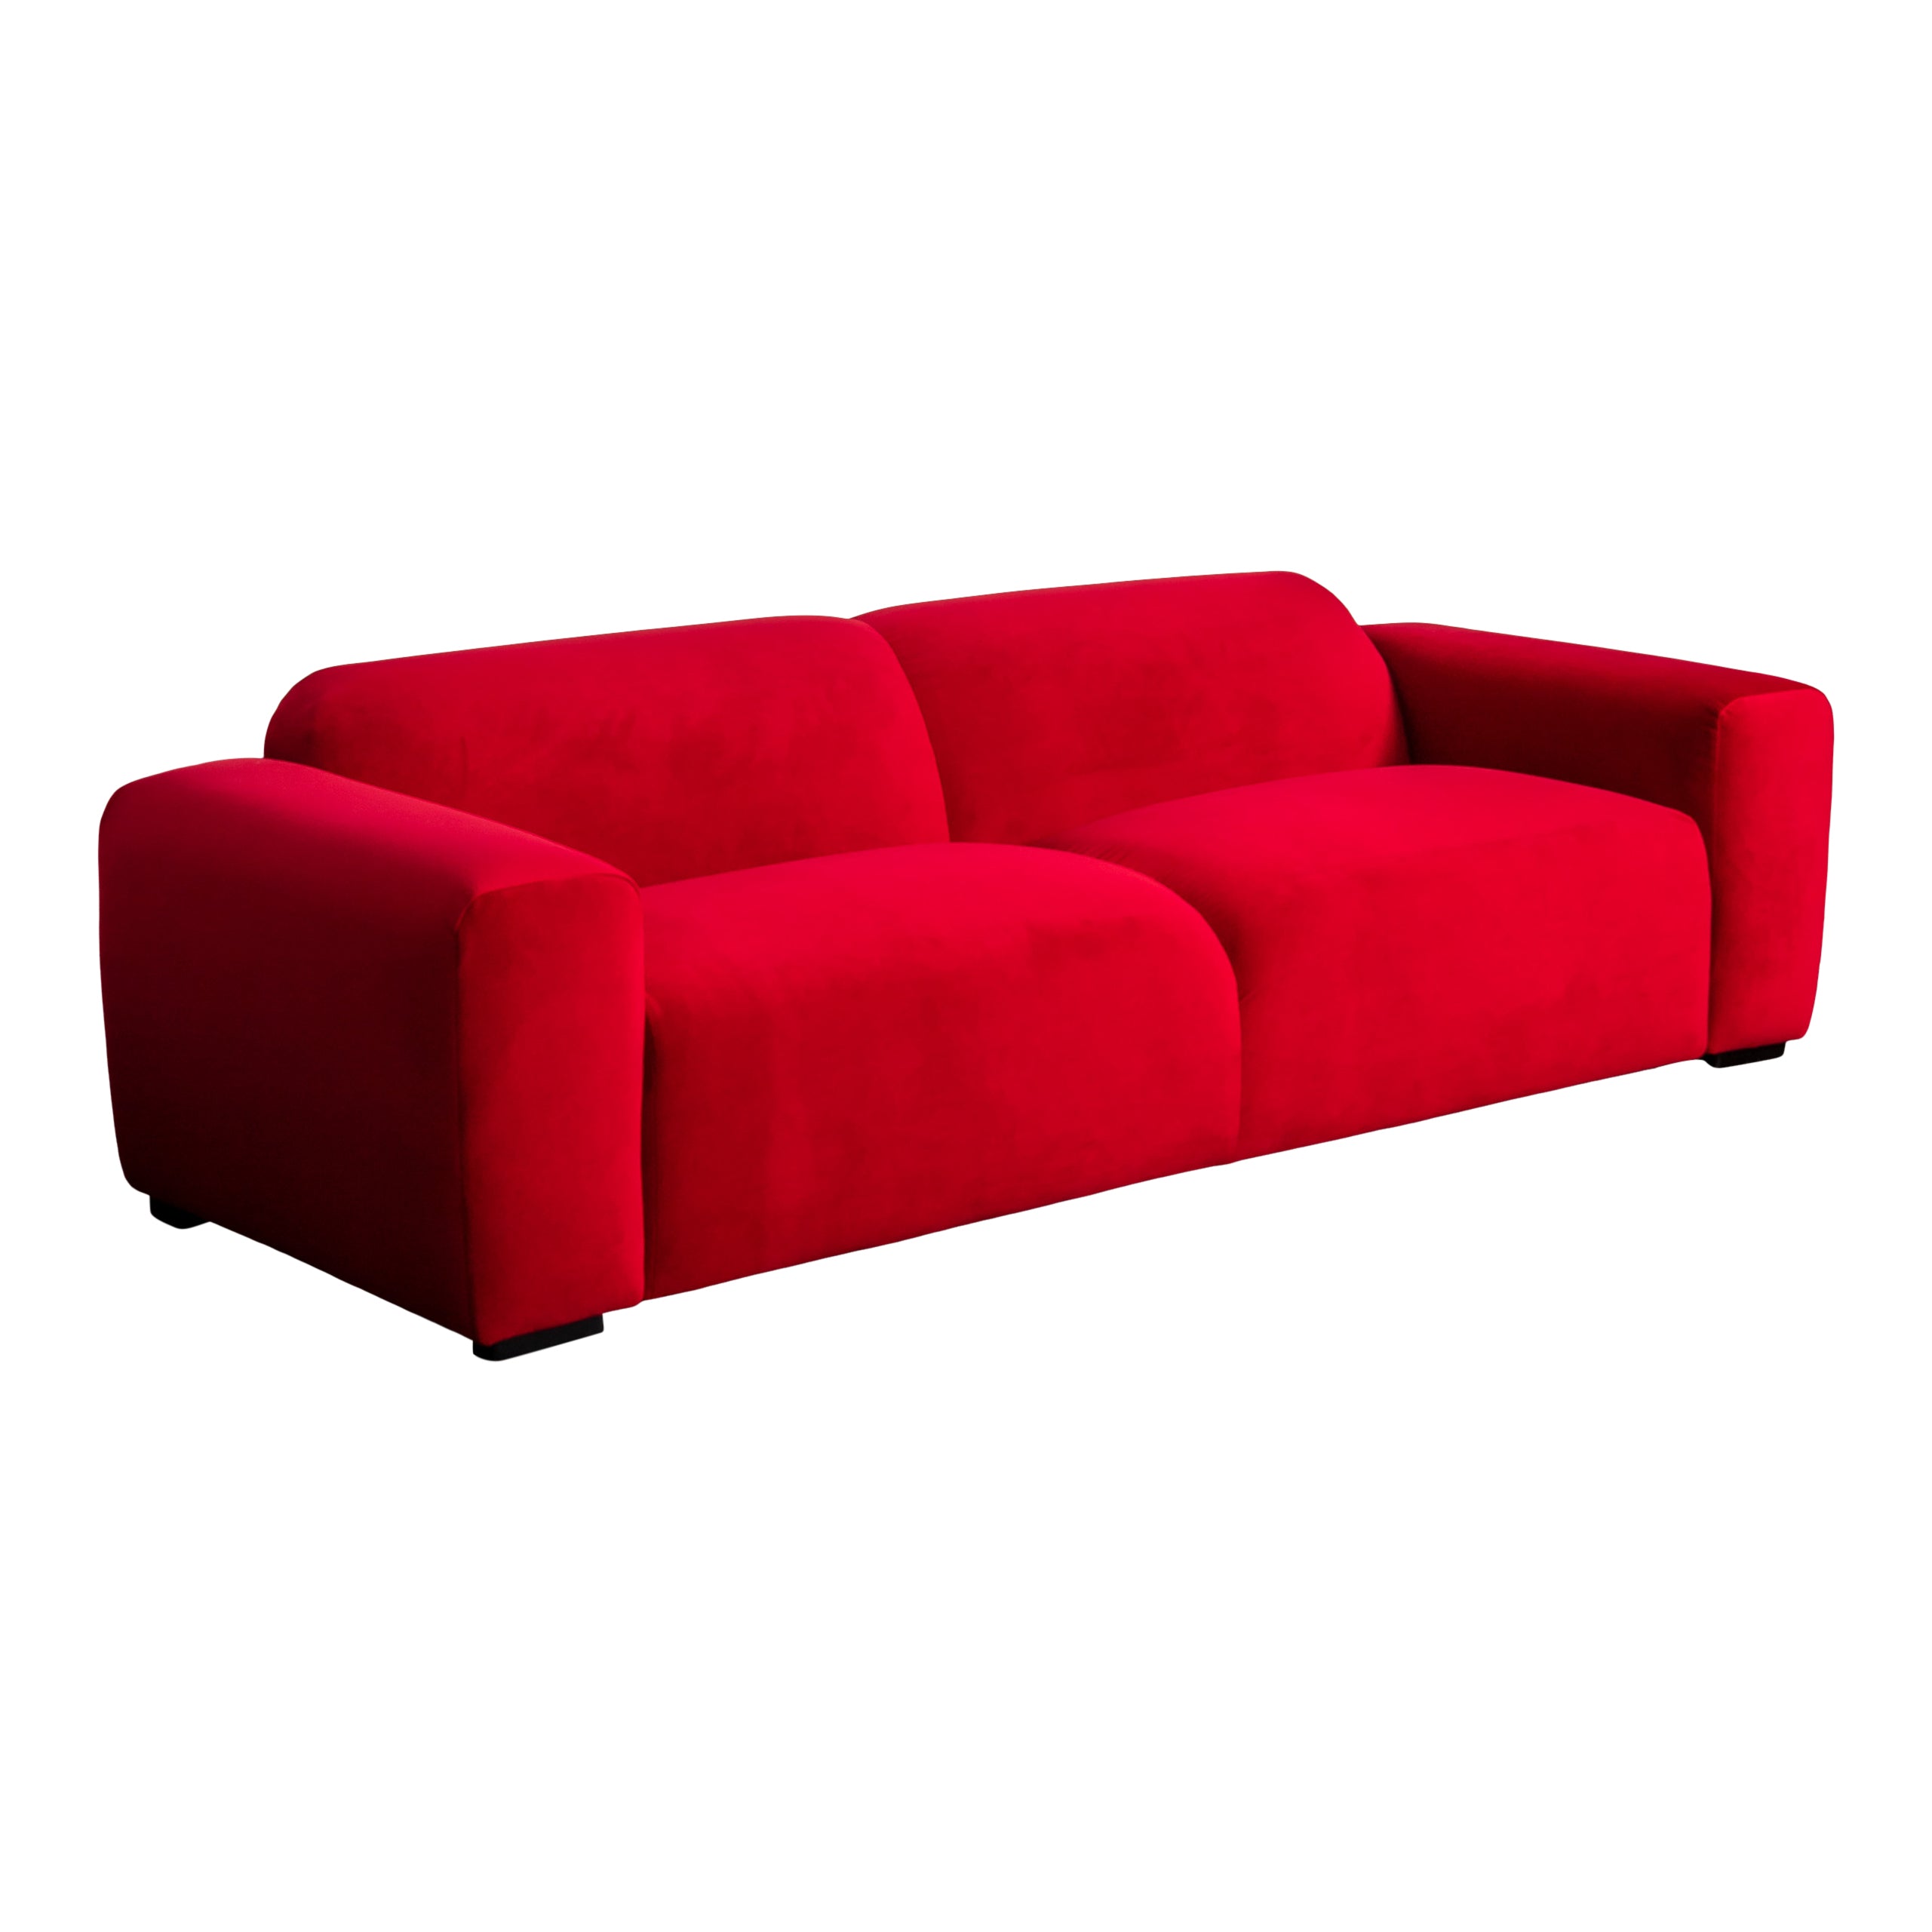 Vida Red Couch Found Rental Co